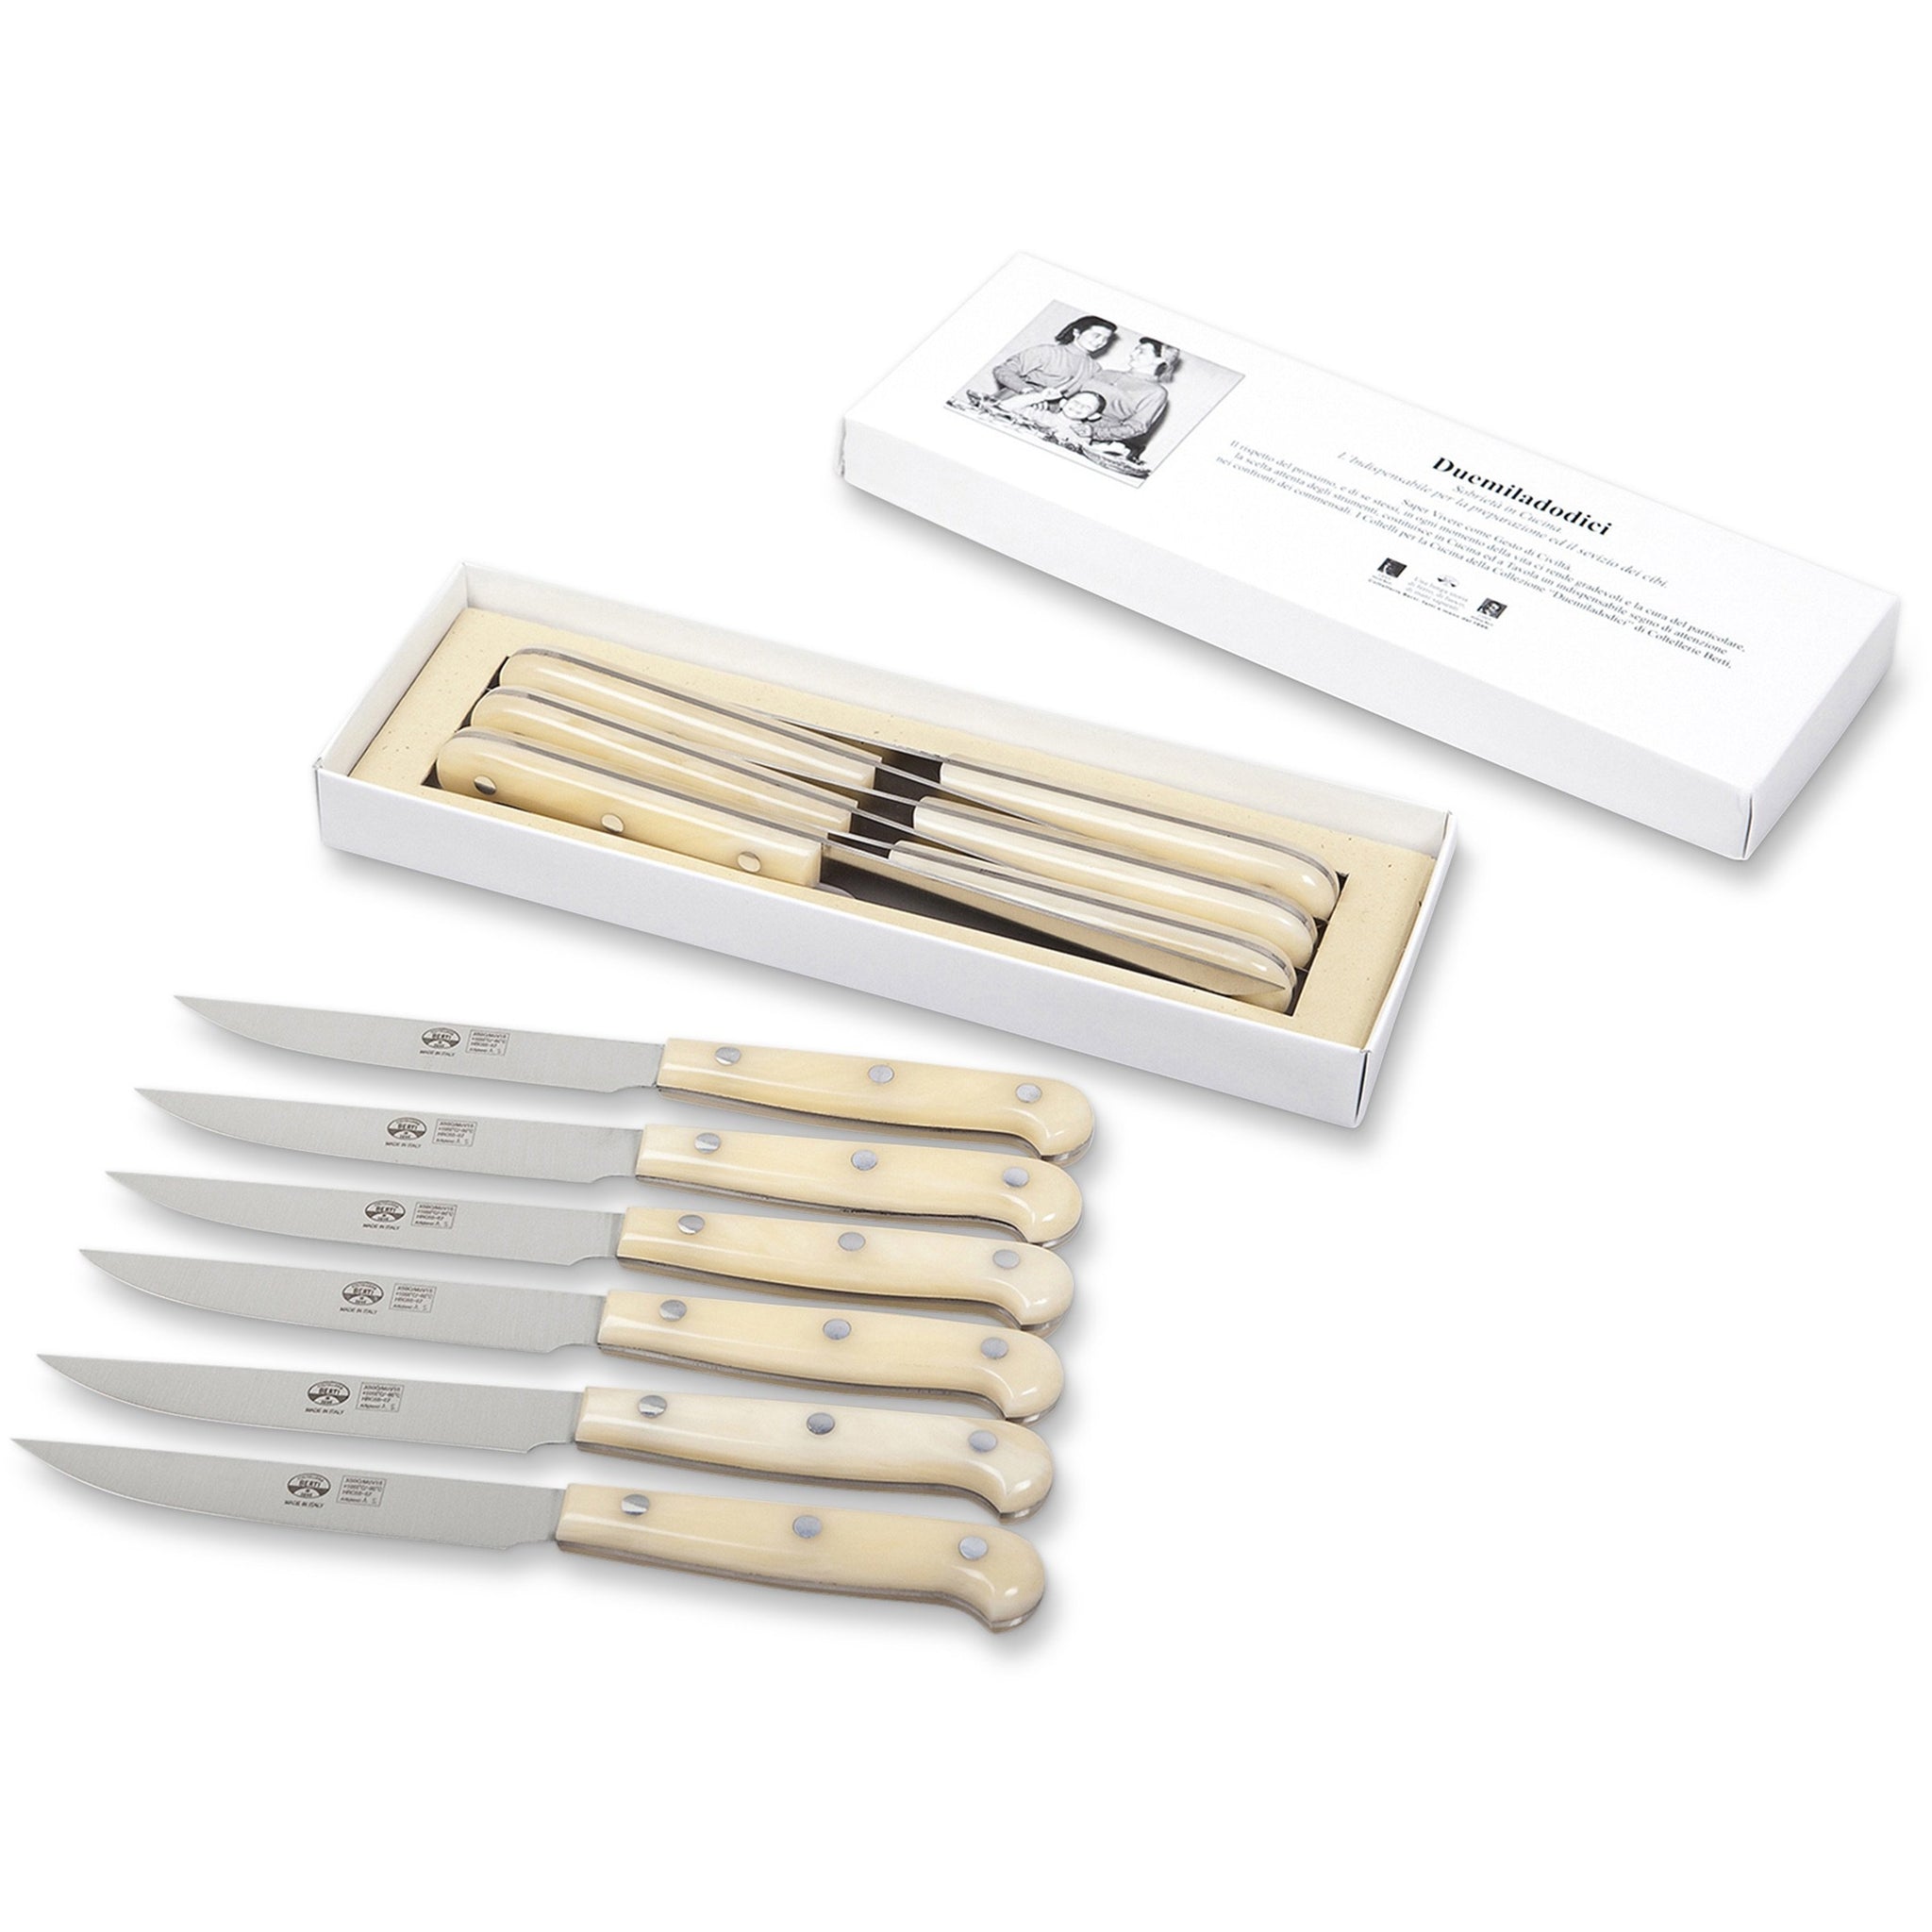 Discontinued 6 piece White Marble Steak Knife Set